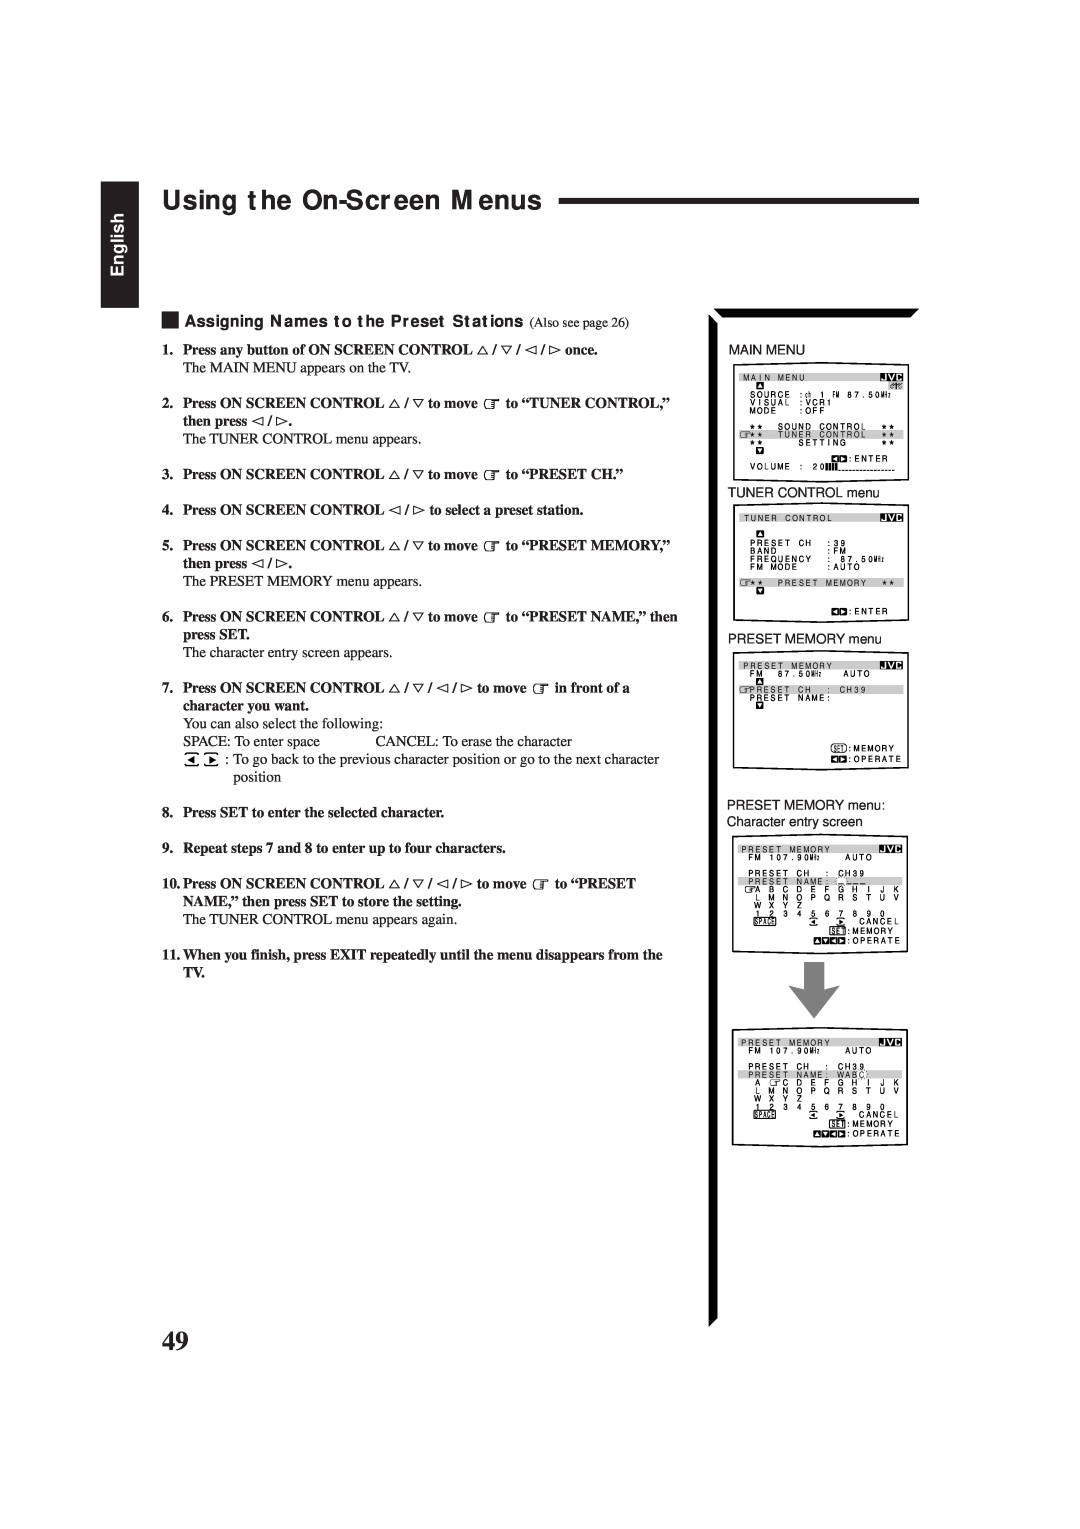 JVC RX-884PBK manual Using the On-ScreenMenus, English, Press SET to enter the selected character 